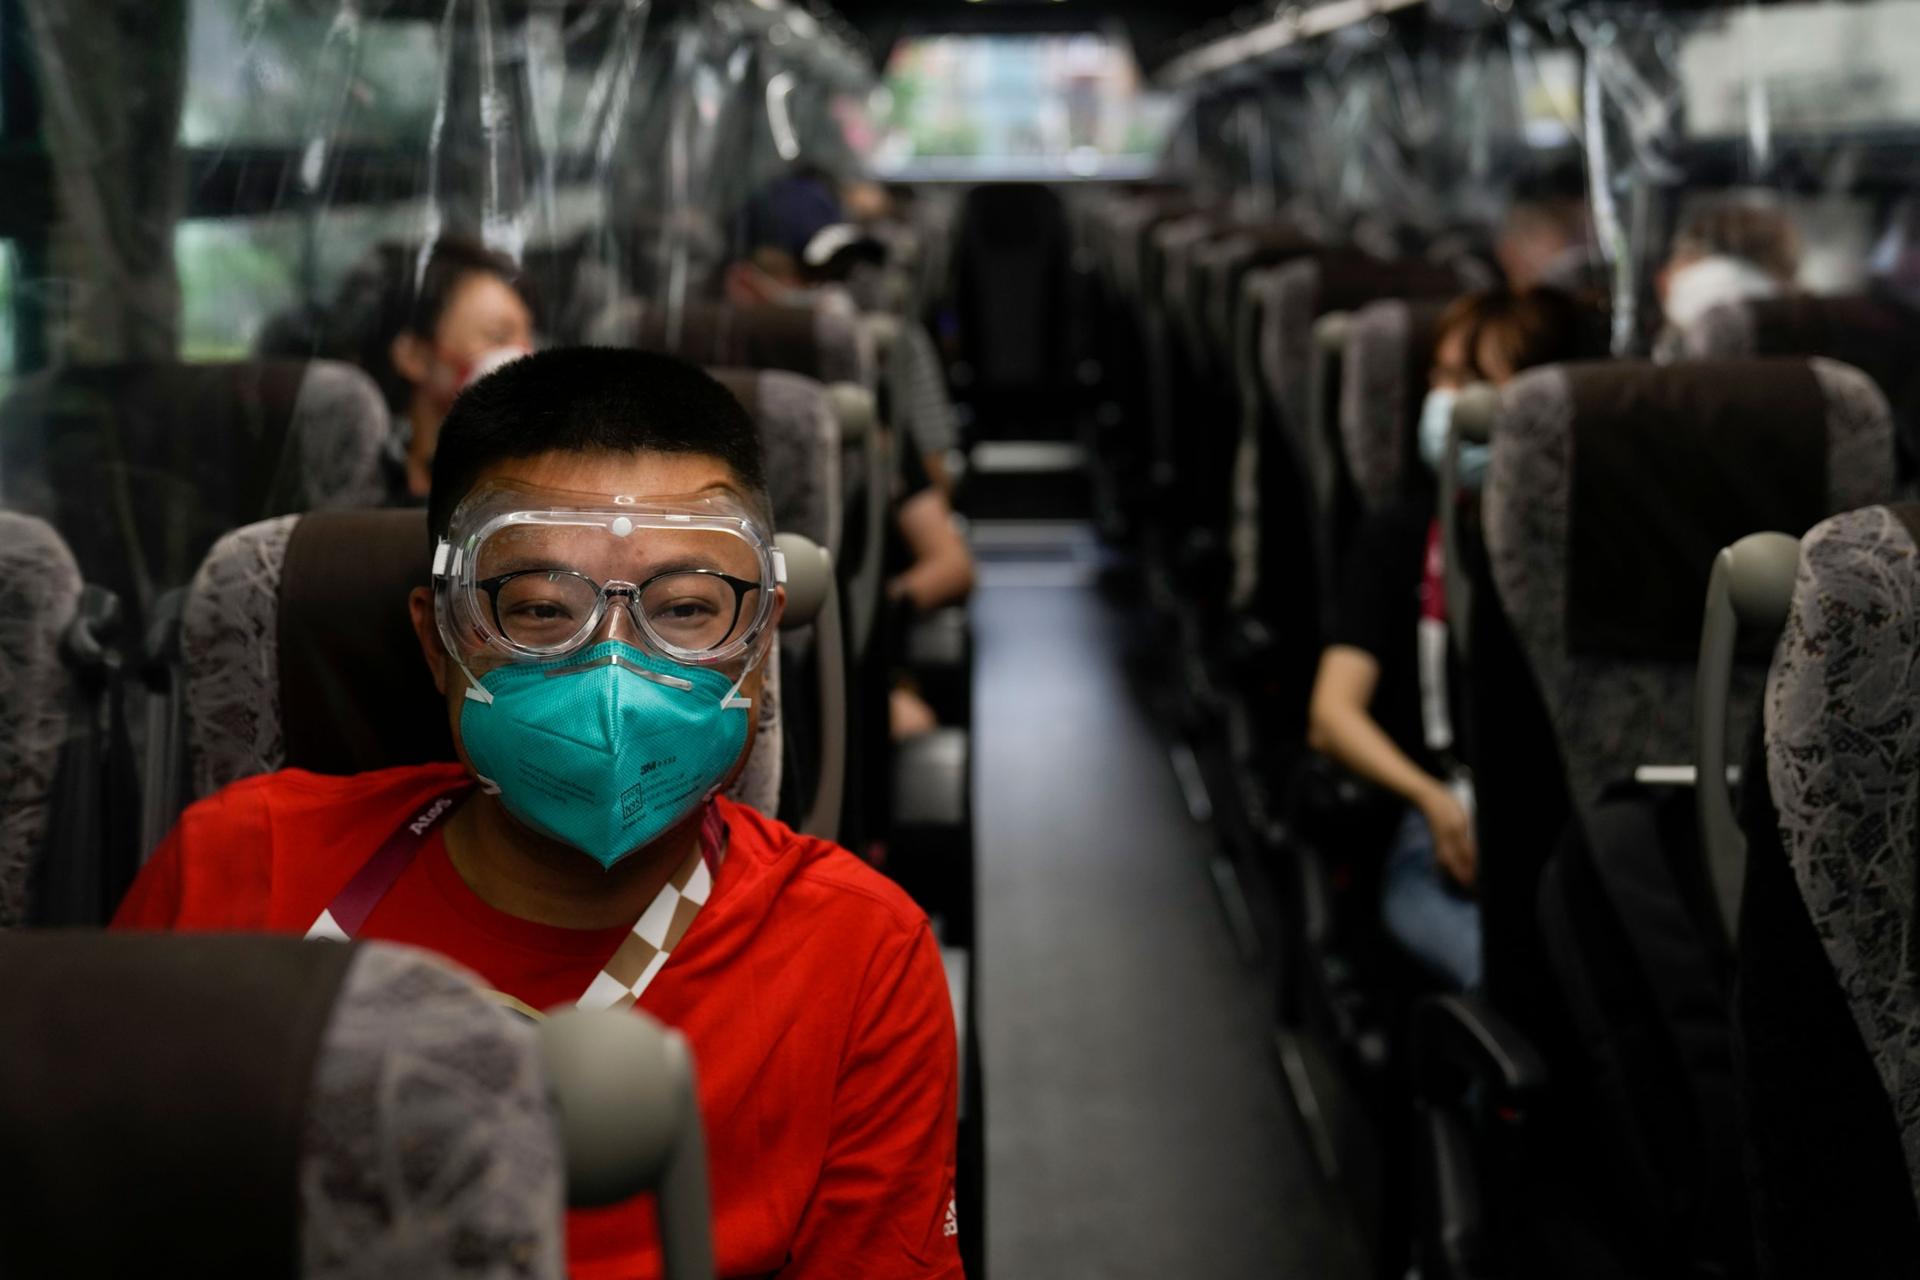 A man is shown wearing a red shirt, face mask and clear goggles while riding a bus.